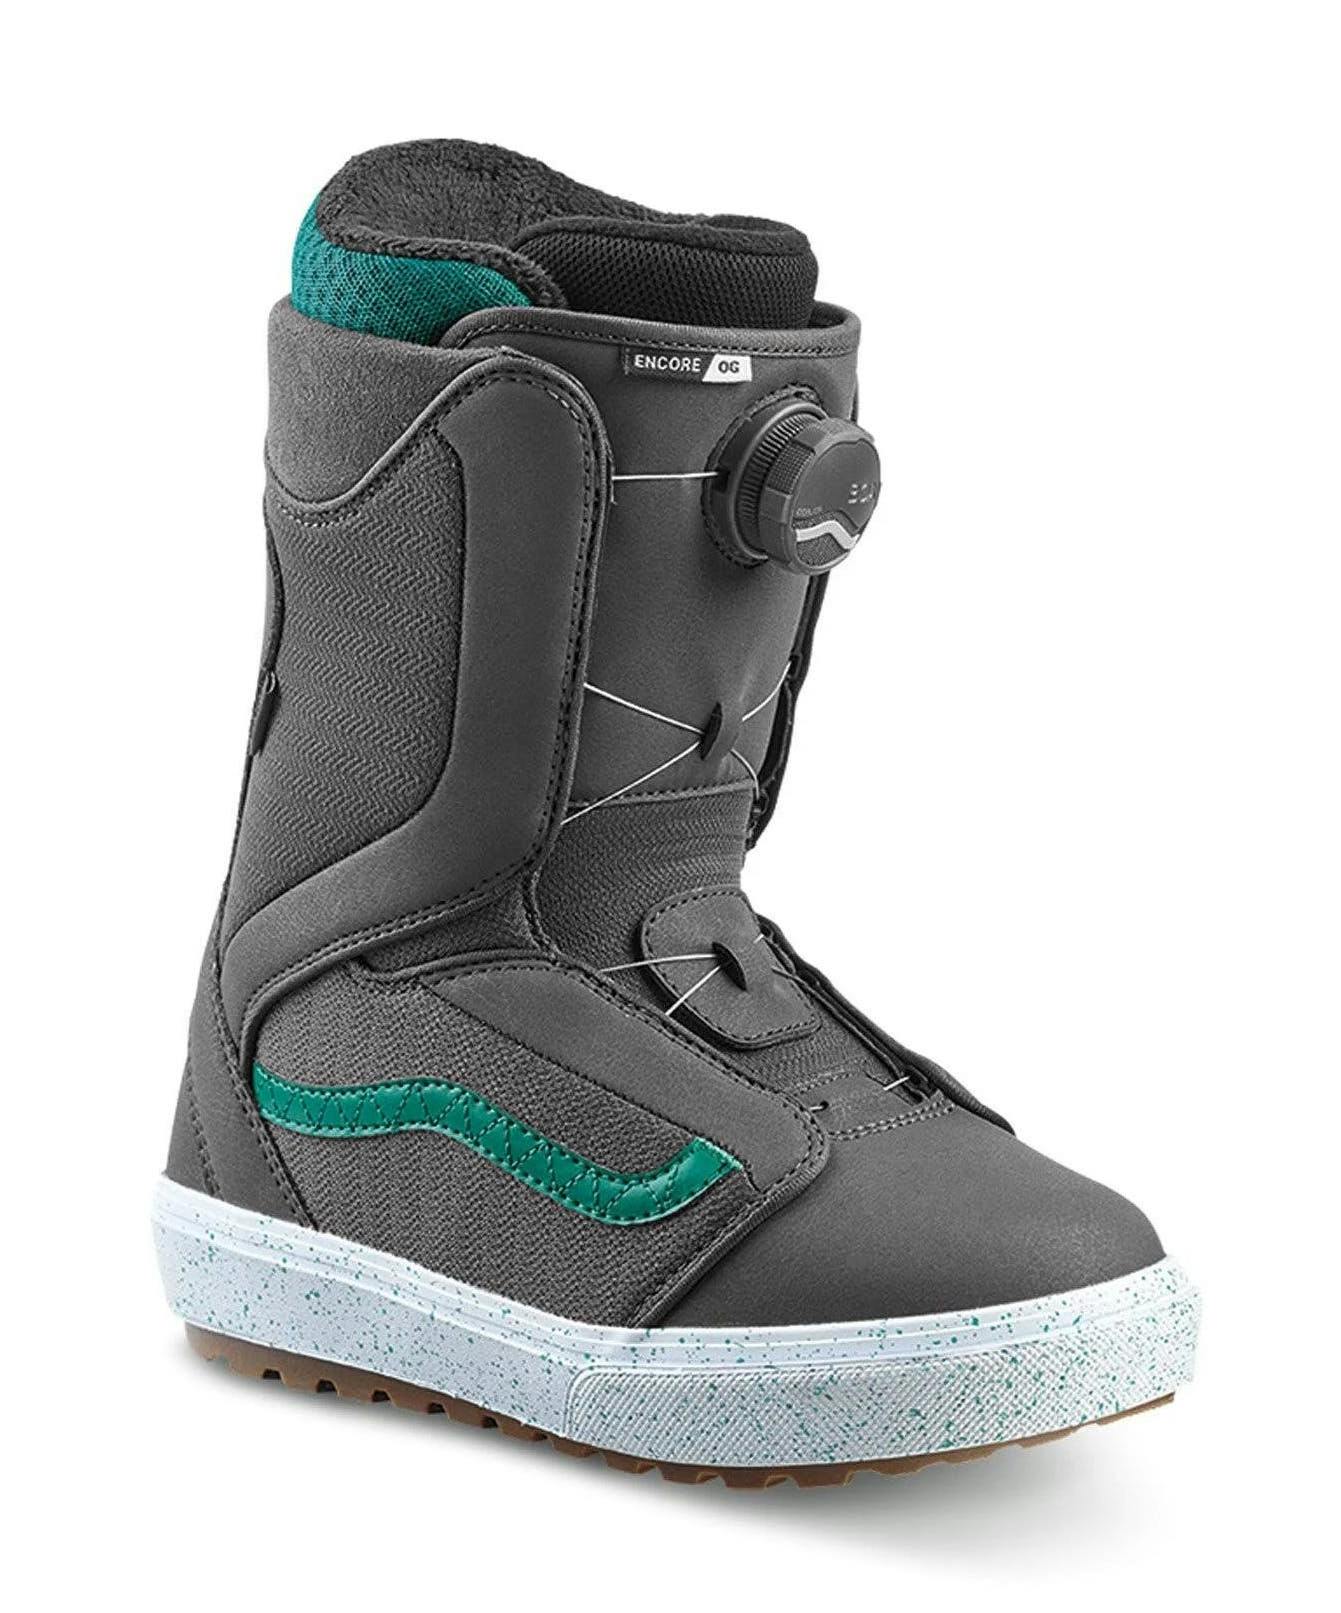 A pair of grey snowboarding boots with teal accents